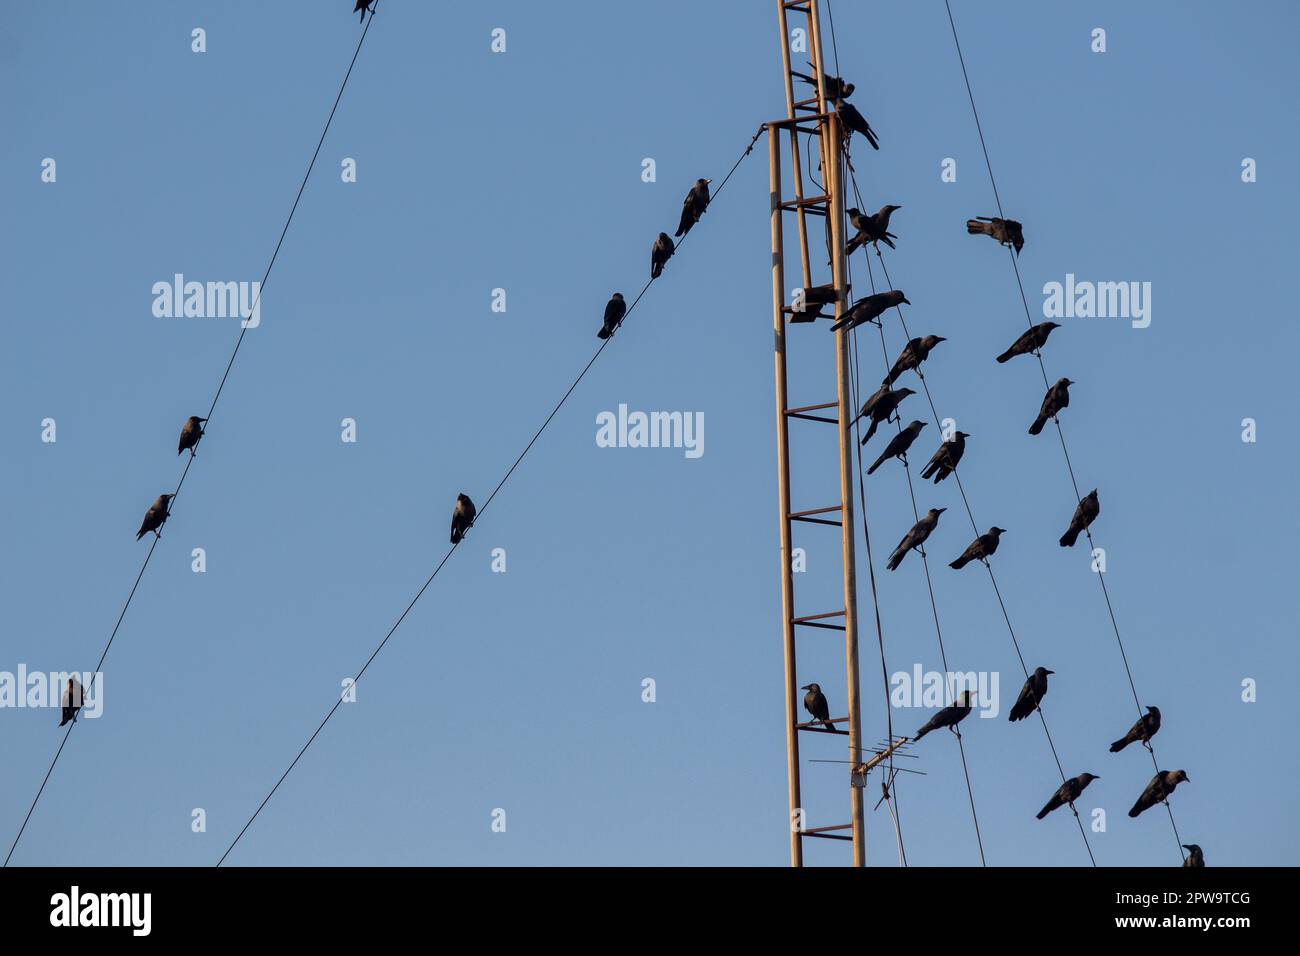 Invasive Indian Crows Perching on Rooftop Cables Stock Photo